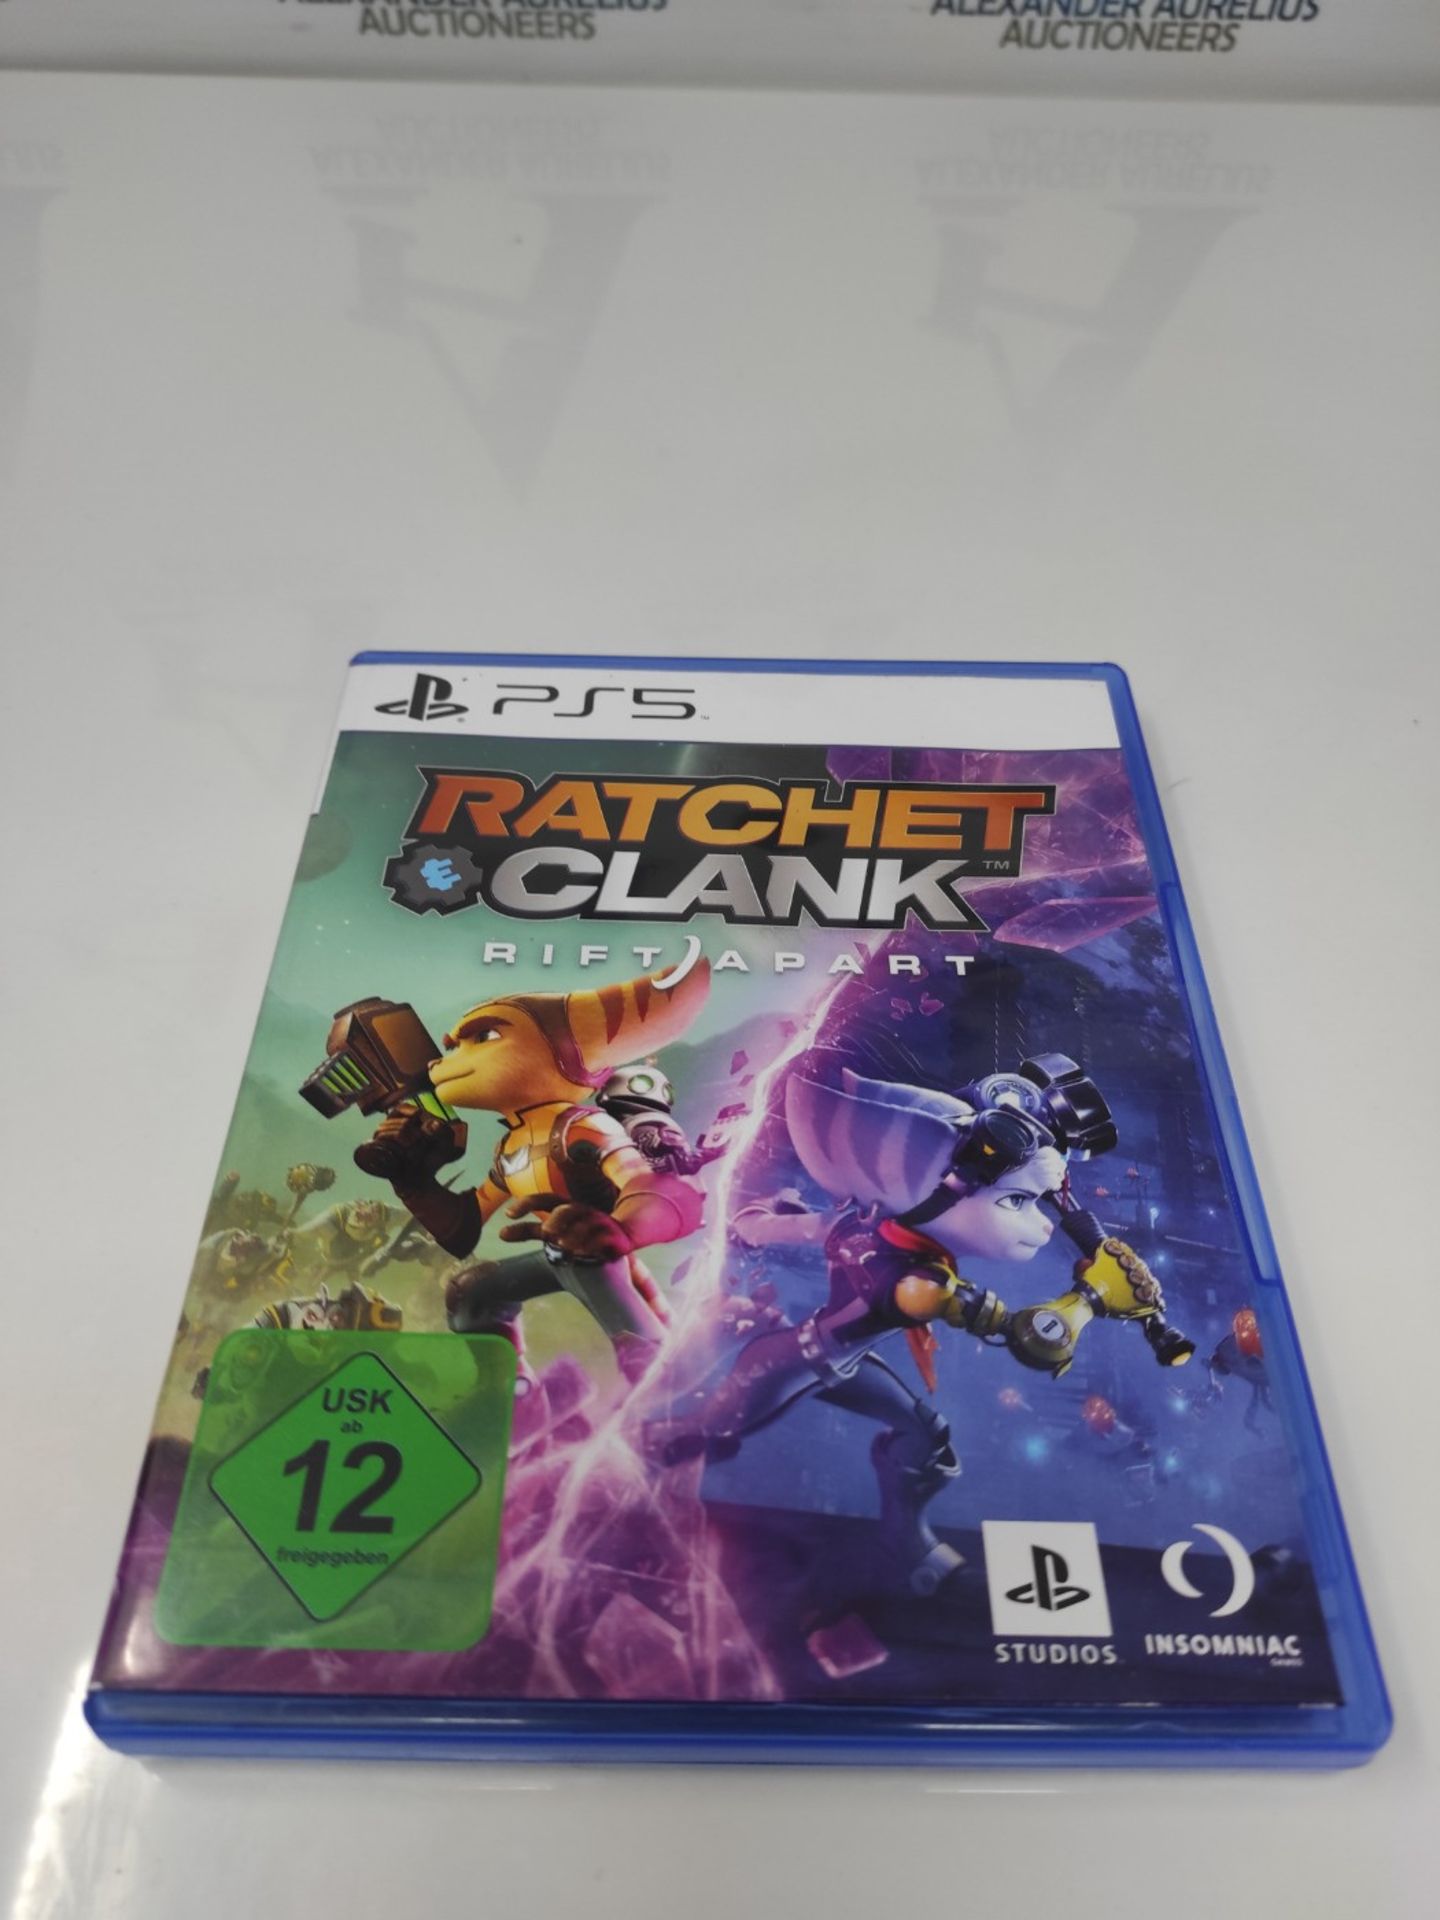 RRP £54.00 Sony, Ratchet & Clank: Rift Apart for PS5, Platform and Adventure game, Standard Editi - Image 2 of 6